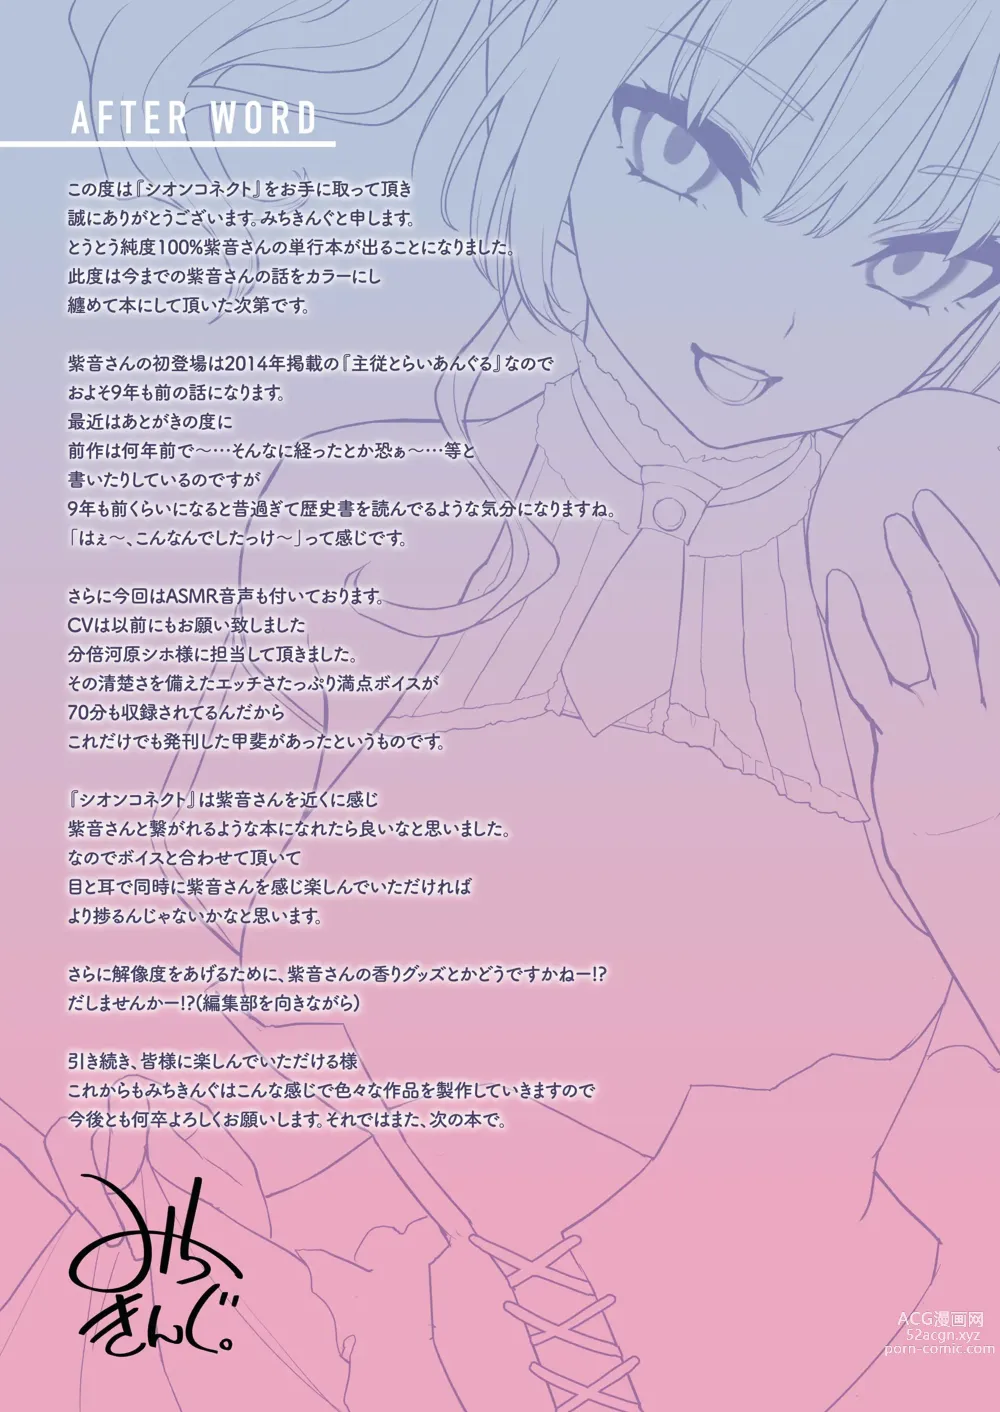 Page 101 of manga Shion Connect